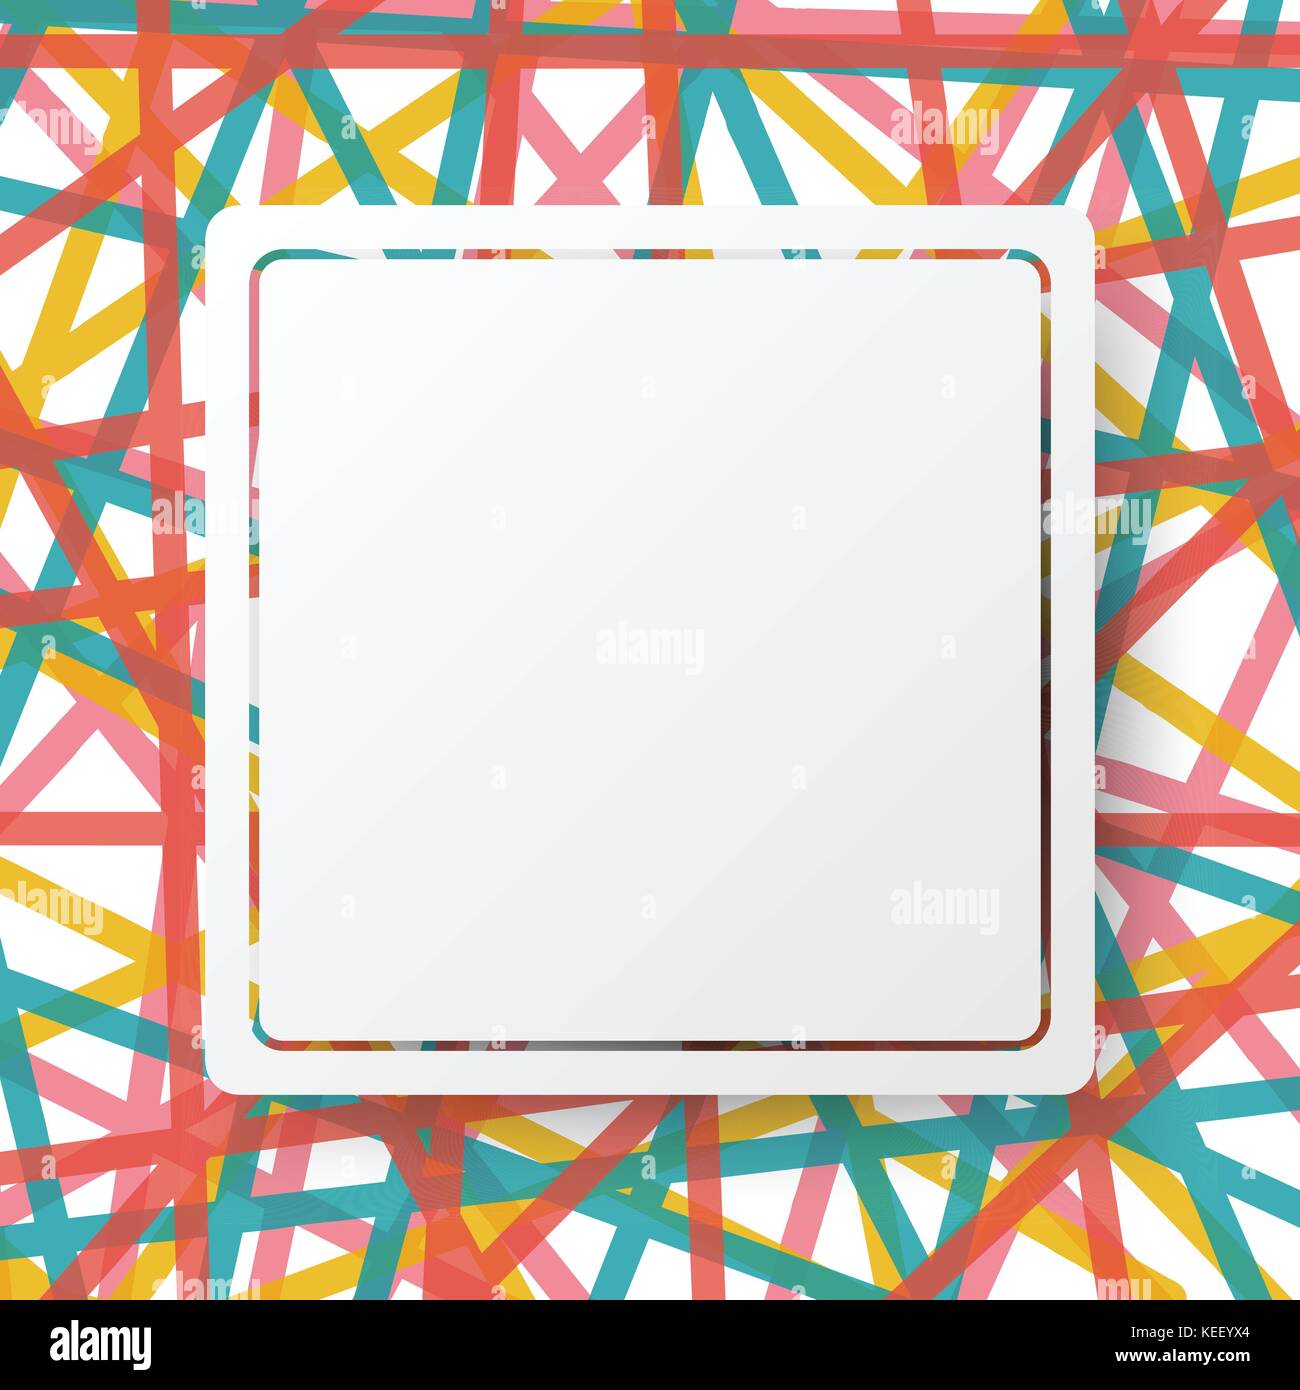 White square board and border on colorful line abstract design ...